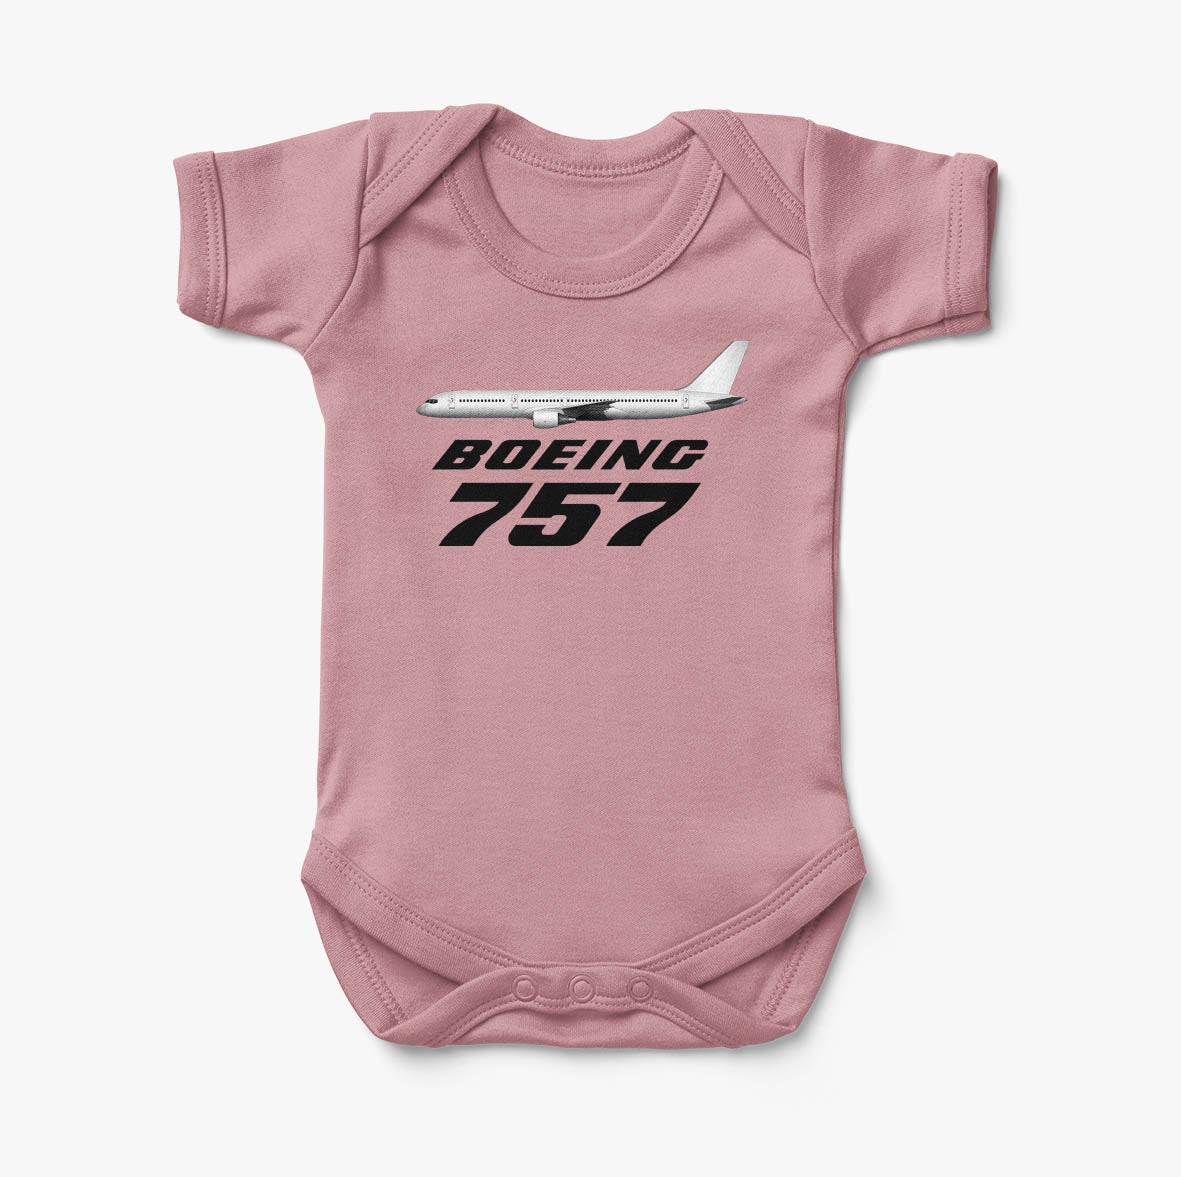 The Boeing 757 Designed Baby Bodysuits